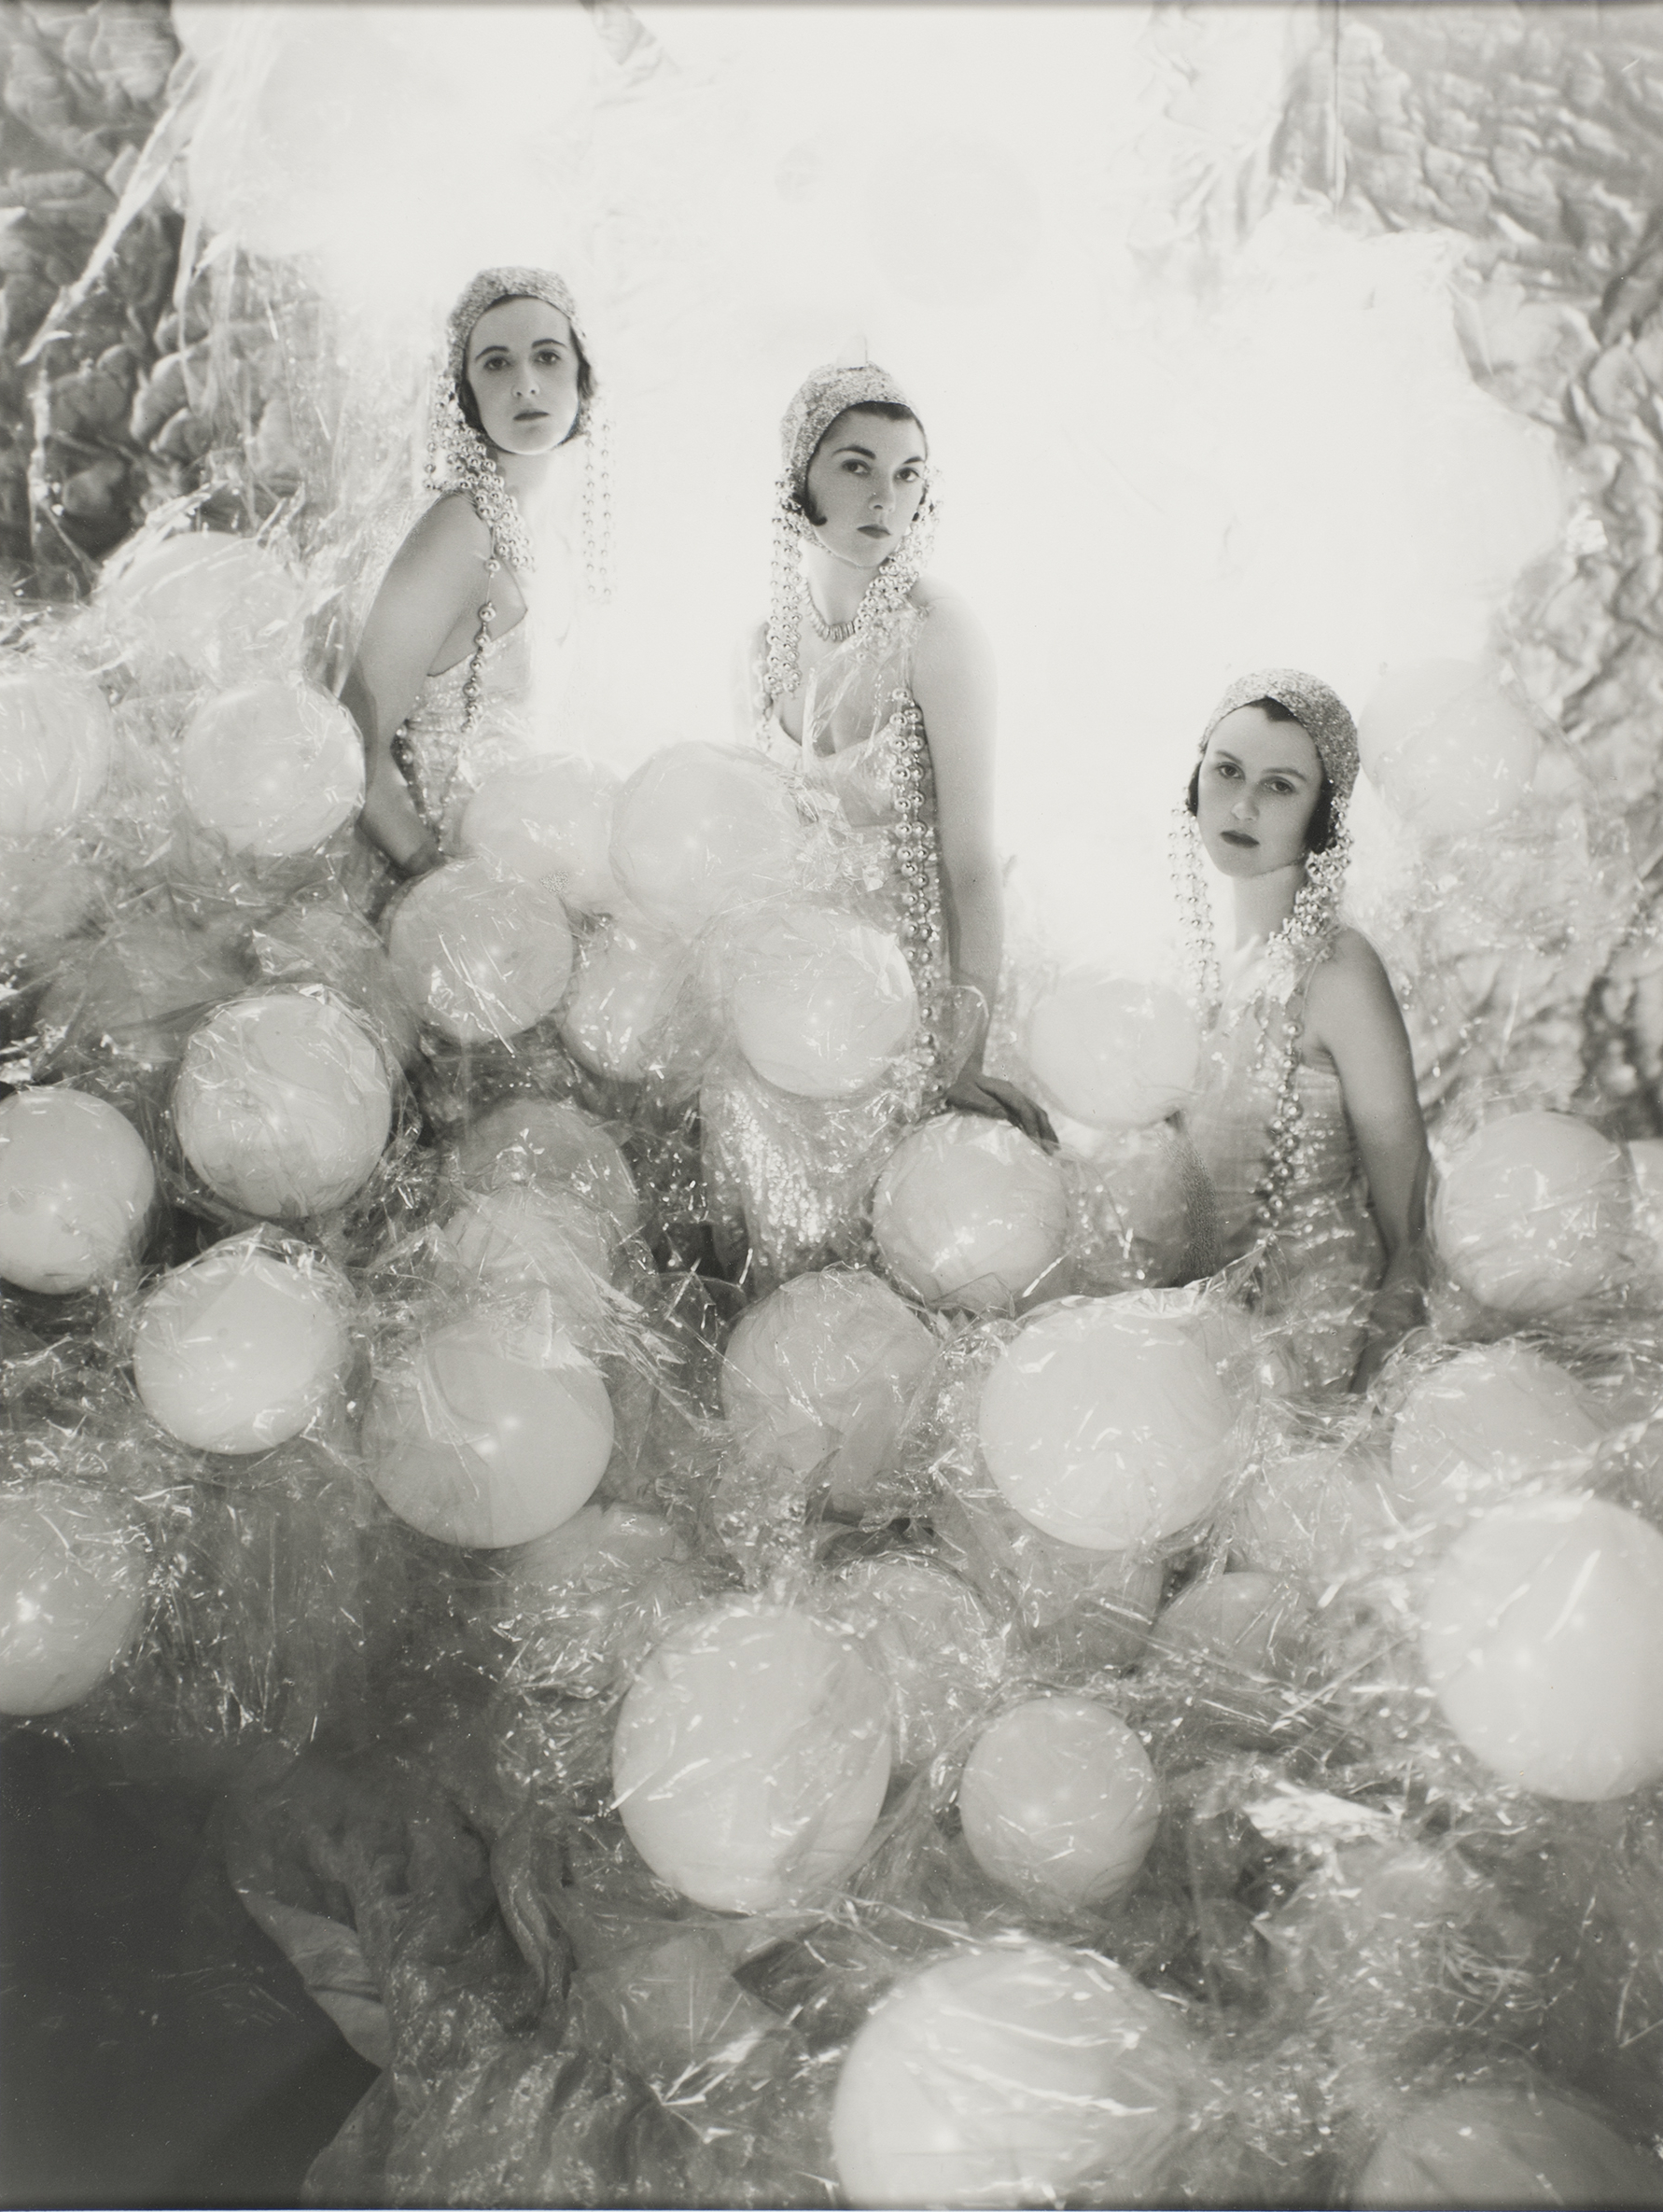 A black and white photo of three women dressed in large gowns made of balloons